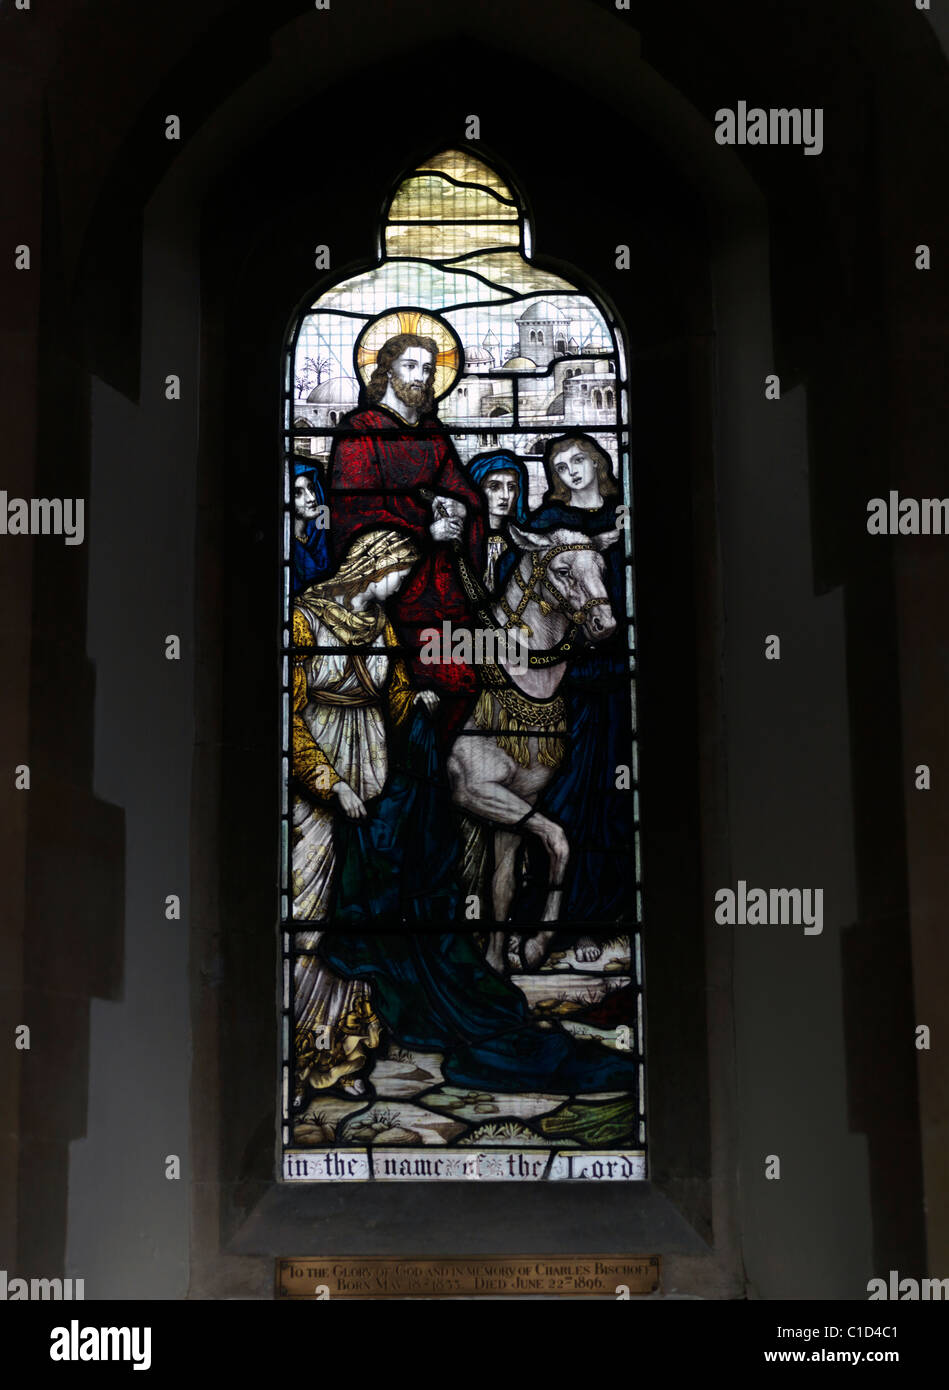 Epsom Surrey England Christchurch Stained Glass Window Of Jesus Christ Entering the city Of Jerusalem Stock Photo